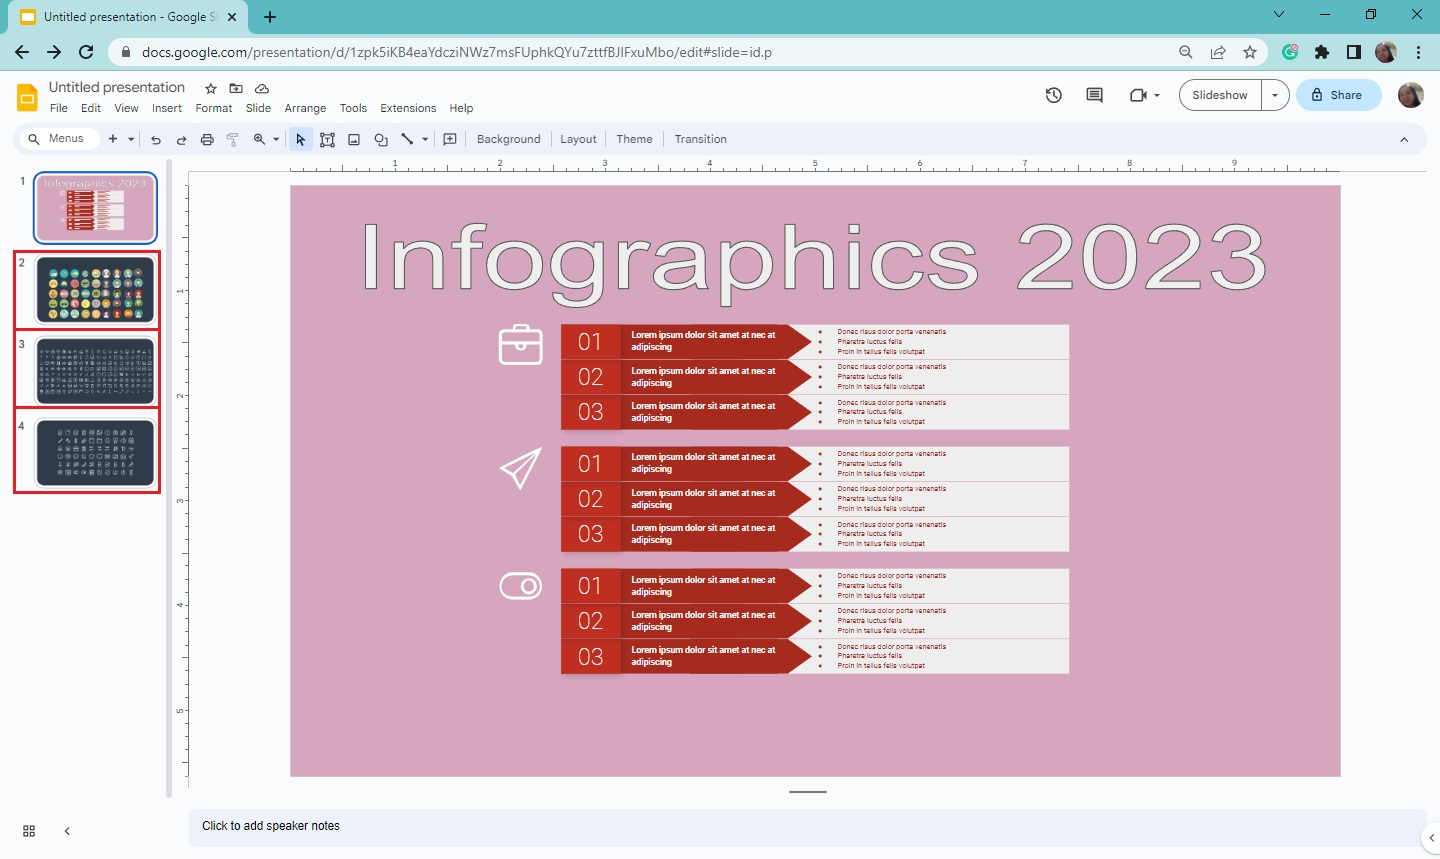 Start to copy and paste the icons from the particular slide to your infographic template.